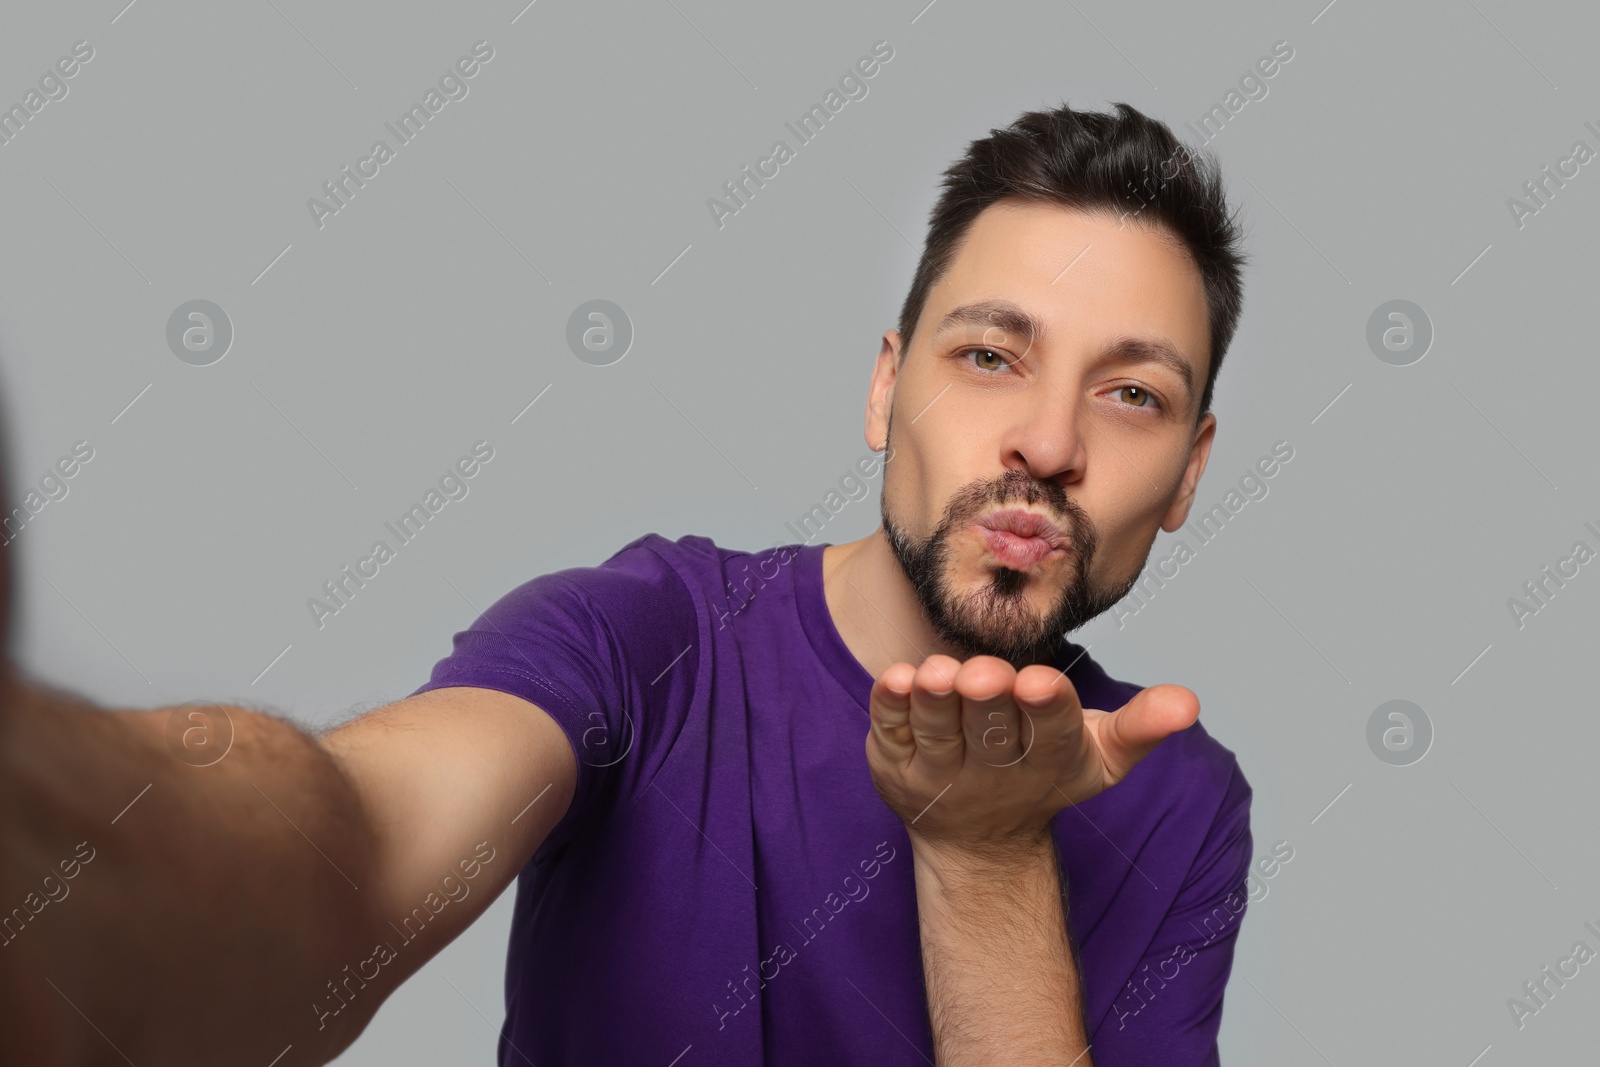 Photo of Handsome man blowing kiss while taking selfie on light grey background